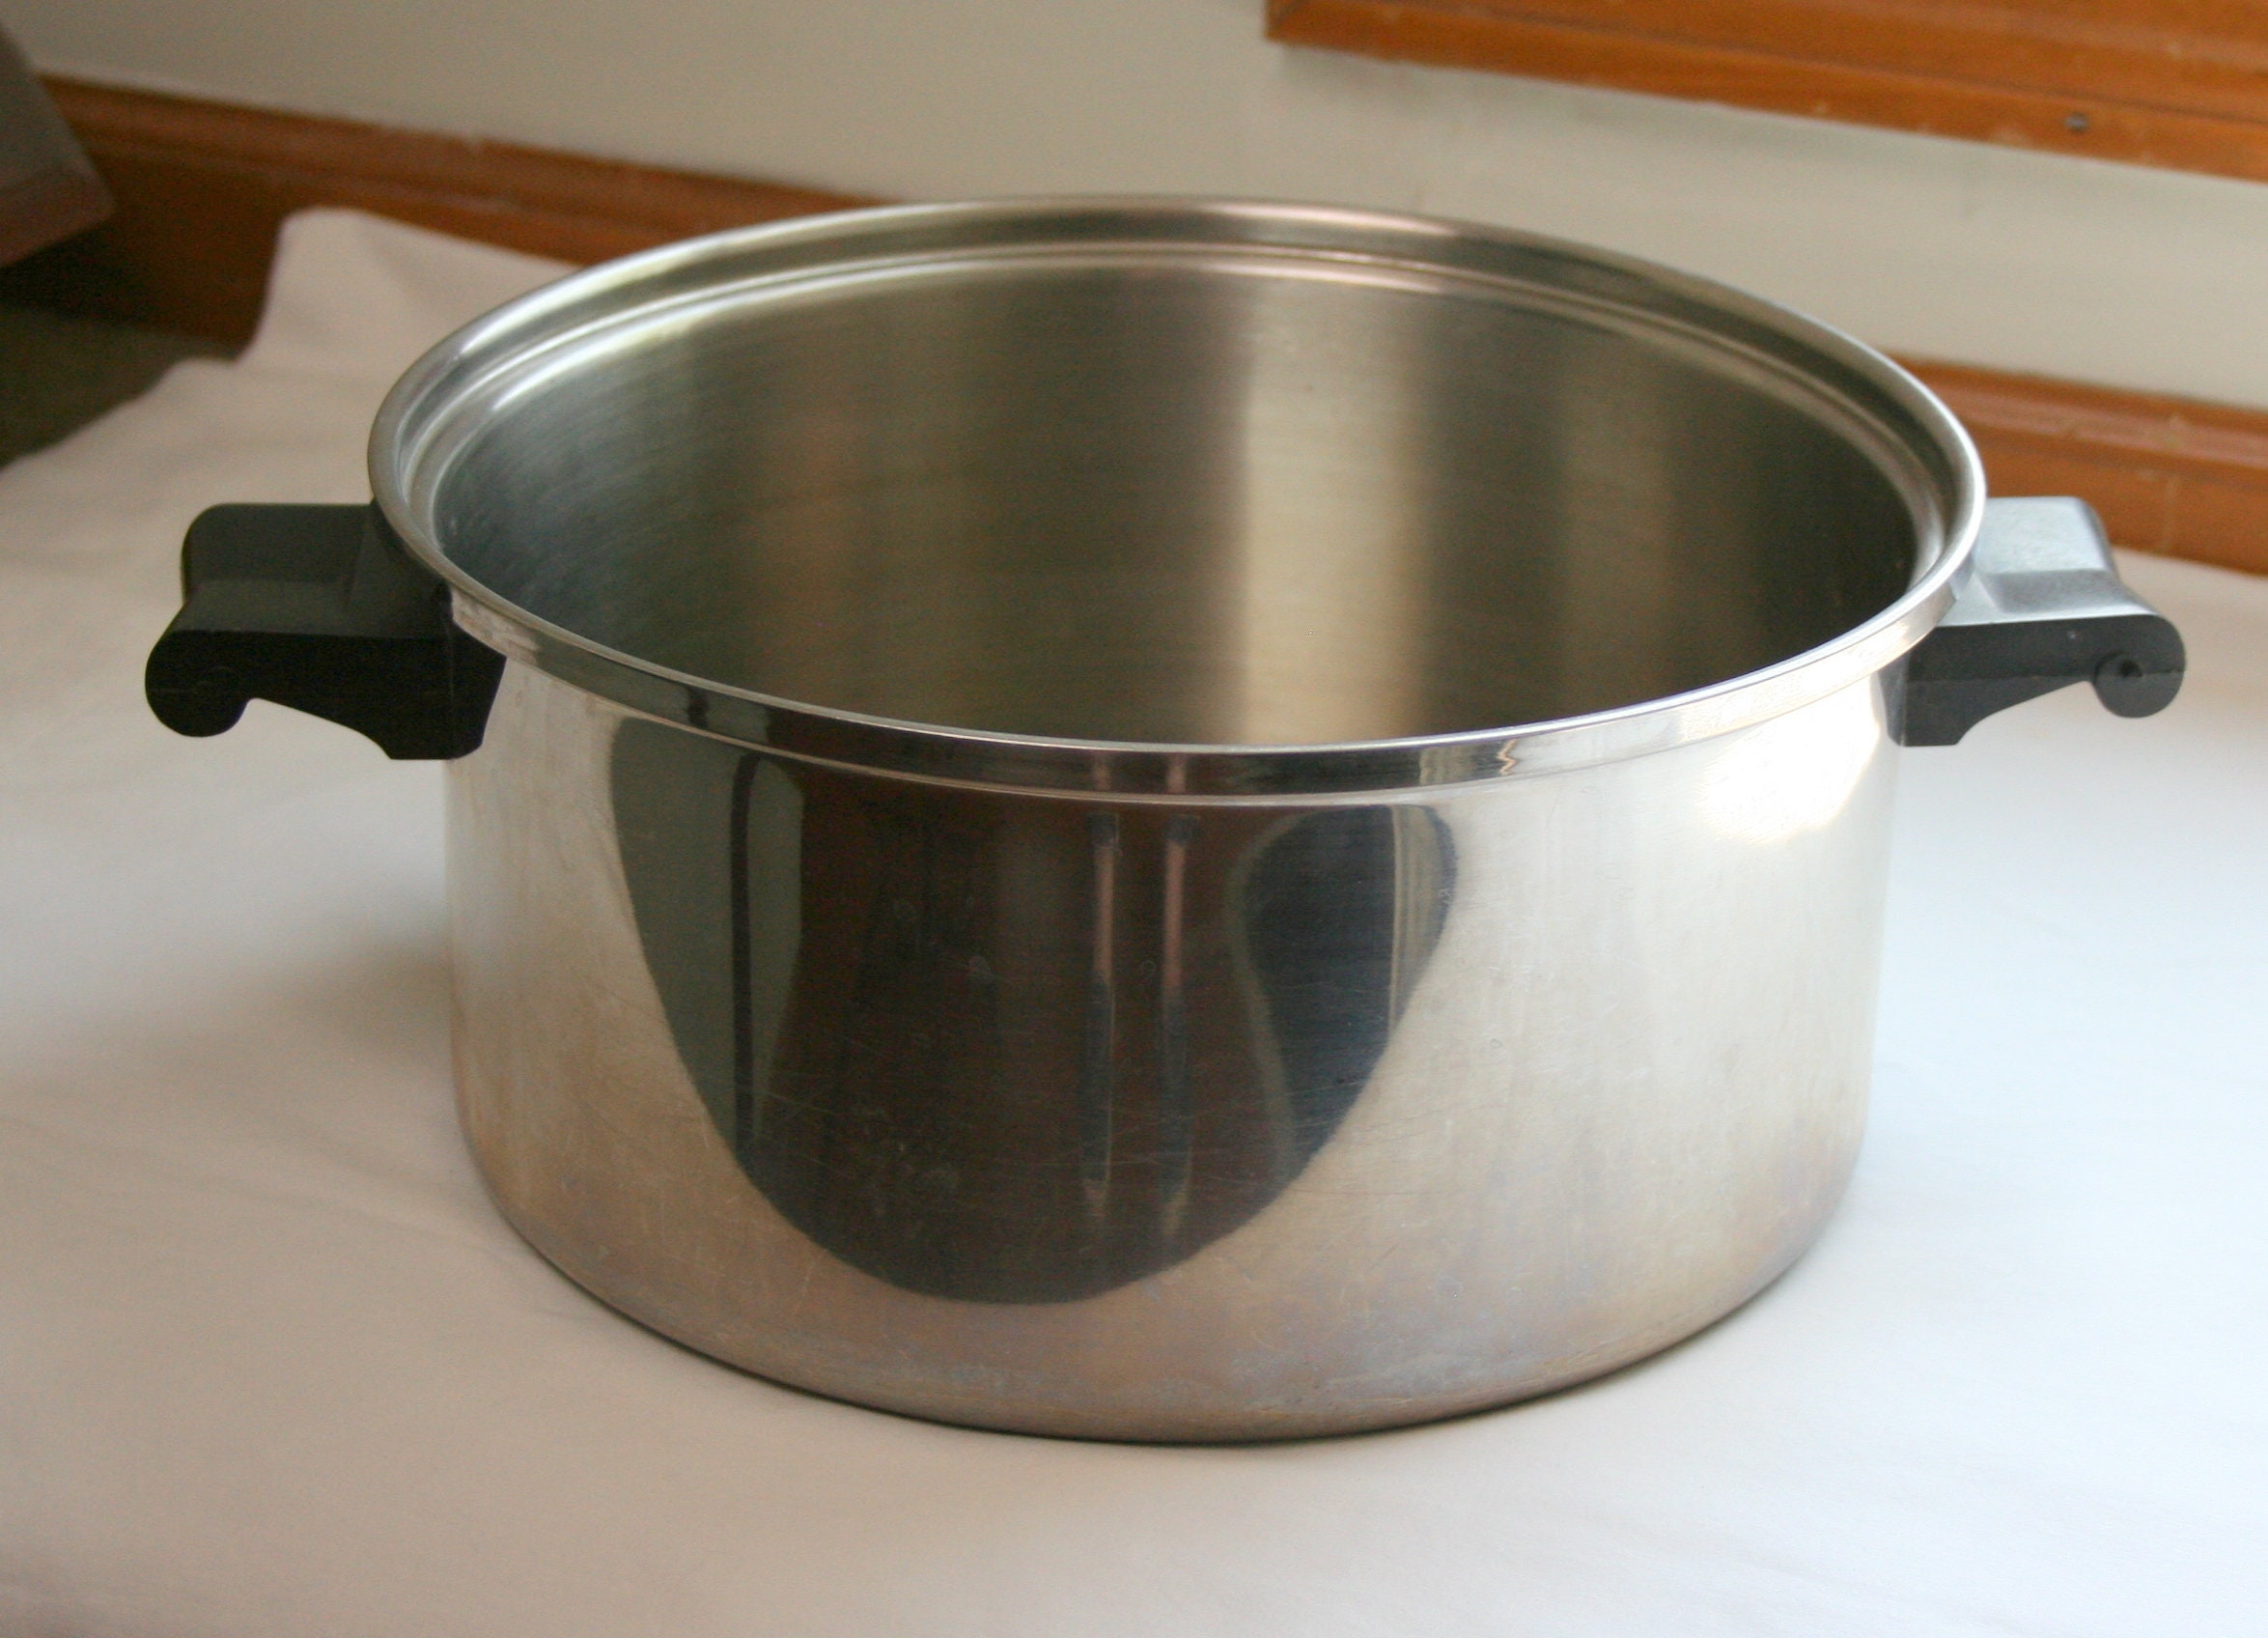 Saladmaster > Our Products > 1 Quart Stainless Steel Saucepans with Lids